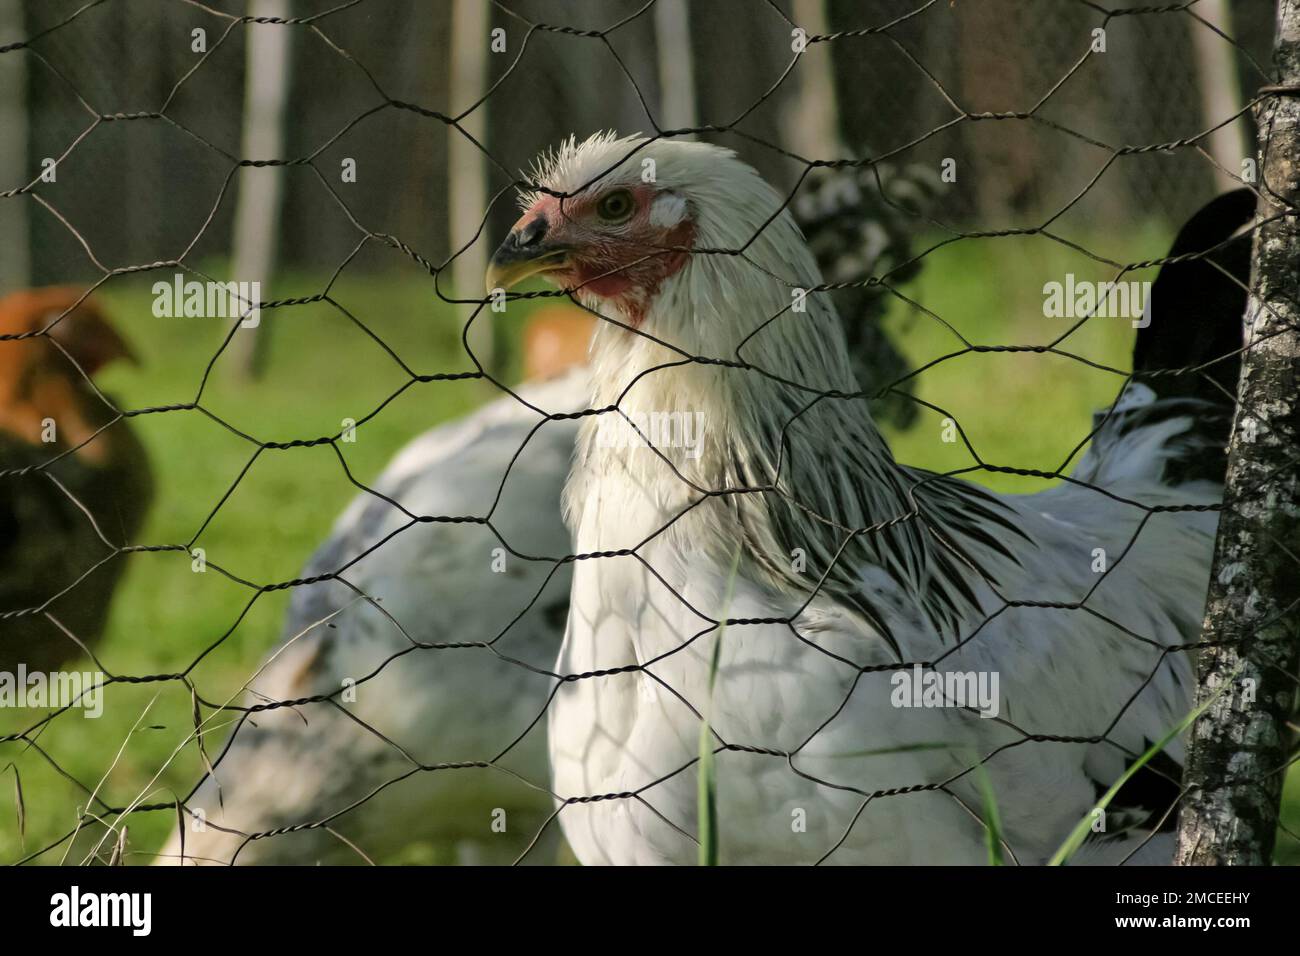 Young rooster behind chicken wire, close-up, Tuscany, Italy Stock Photo